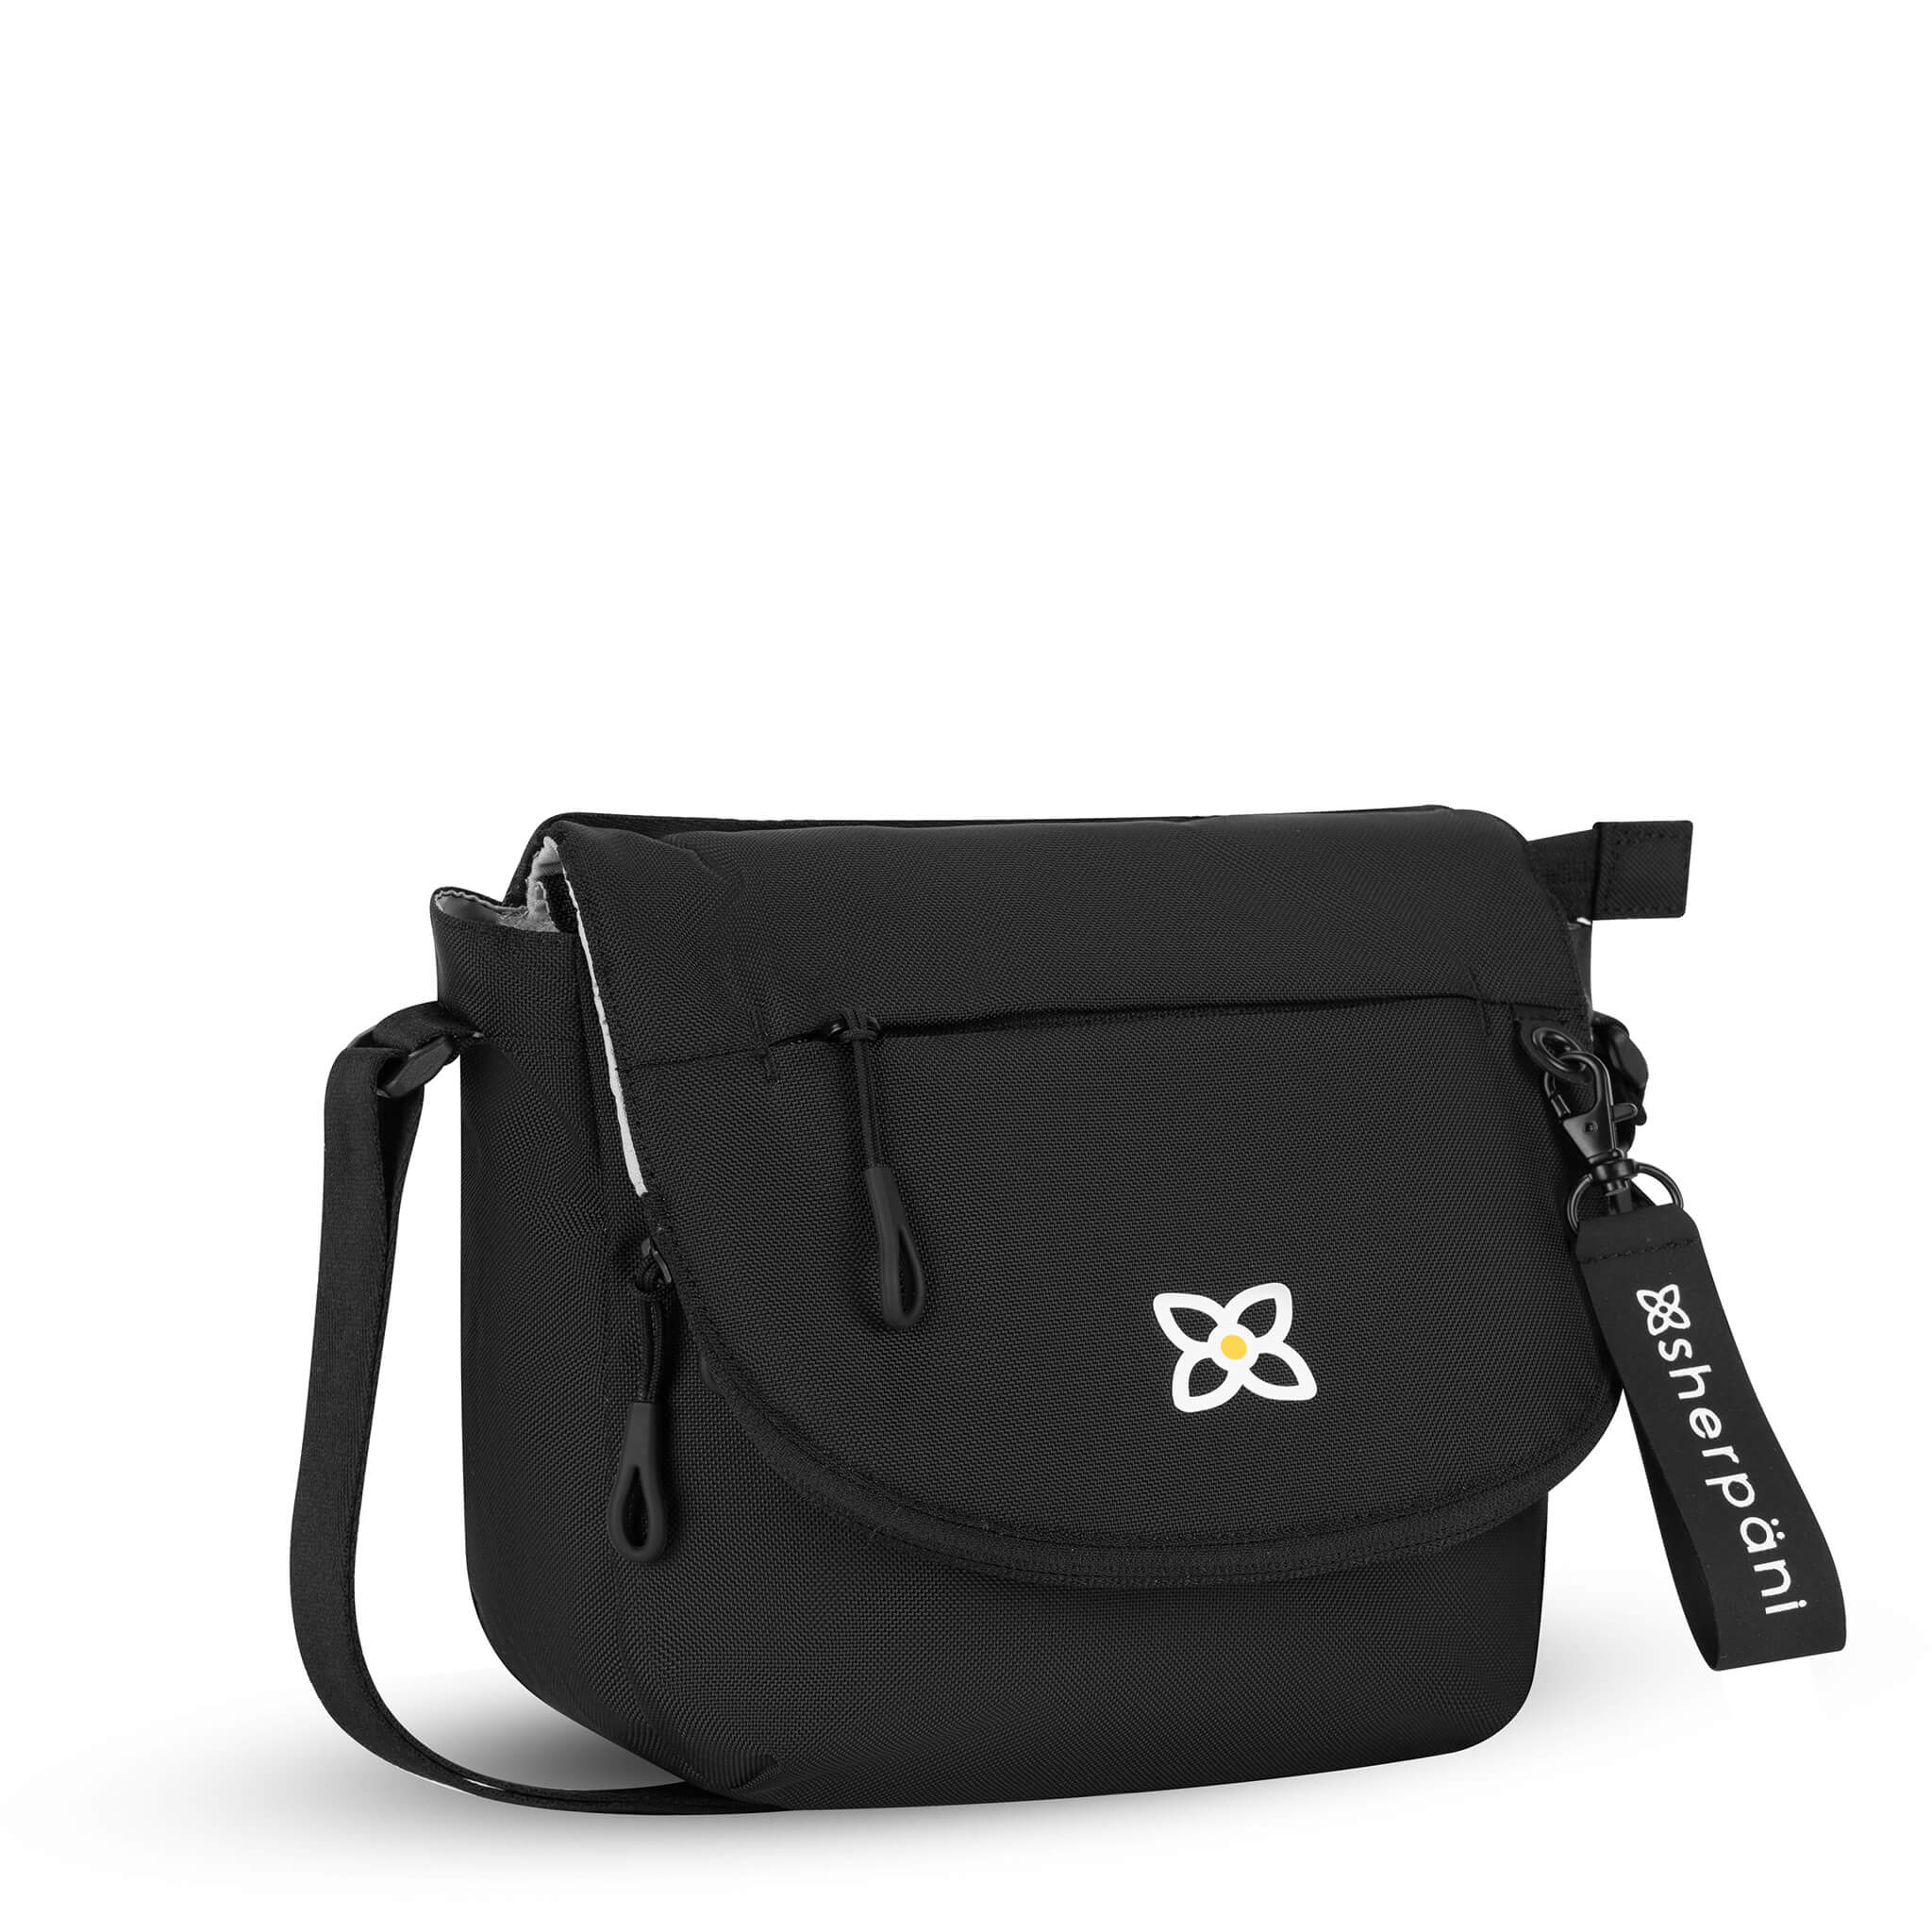 Angled front view of Sherpani messenger satchel bag, the Milli in Raven. Milli features include an adjustable crossbody strap, front zipper pocket, brimmed zipper pocket, detachable keychain, magnetic closure, RFID security and multiple internal pockets for organization. The Raven color is a true black with Sherpani logo (edelweiss flower) accented in white.